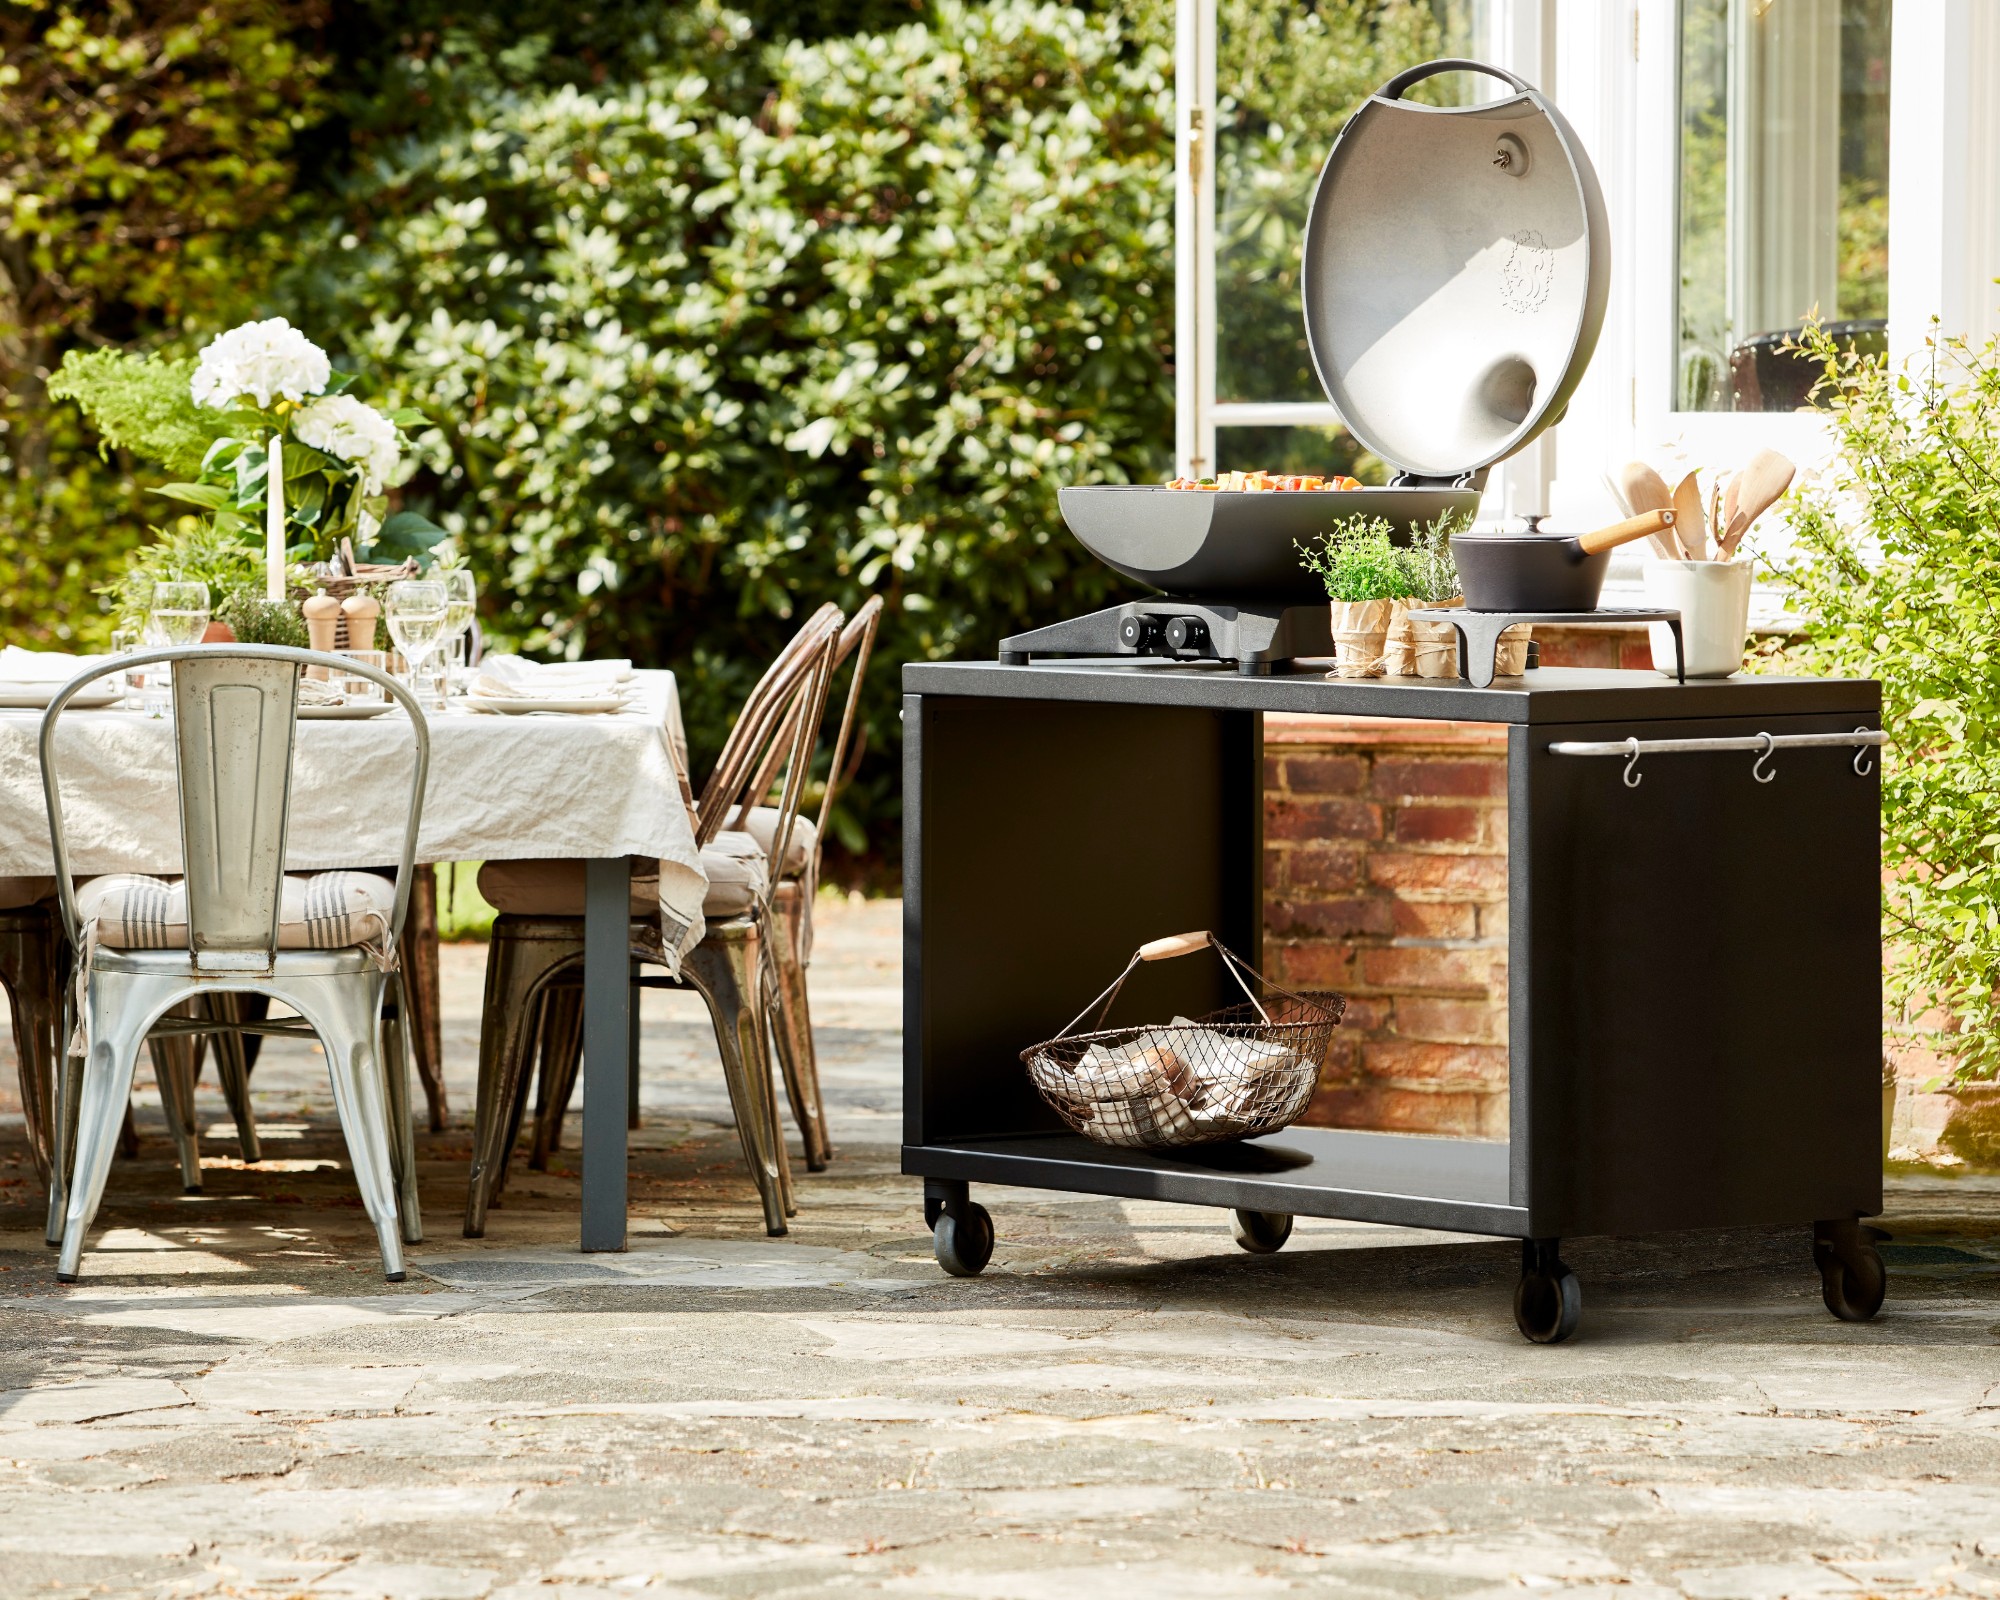 18 outdoor kitchen ideas – enviable and inspiring designs for your ...